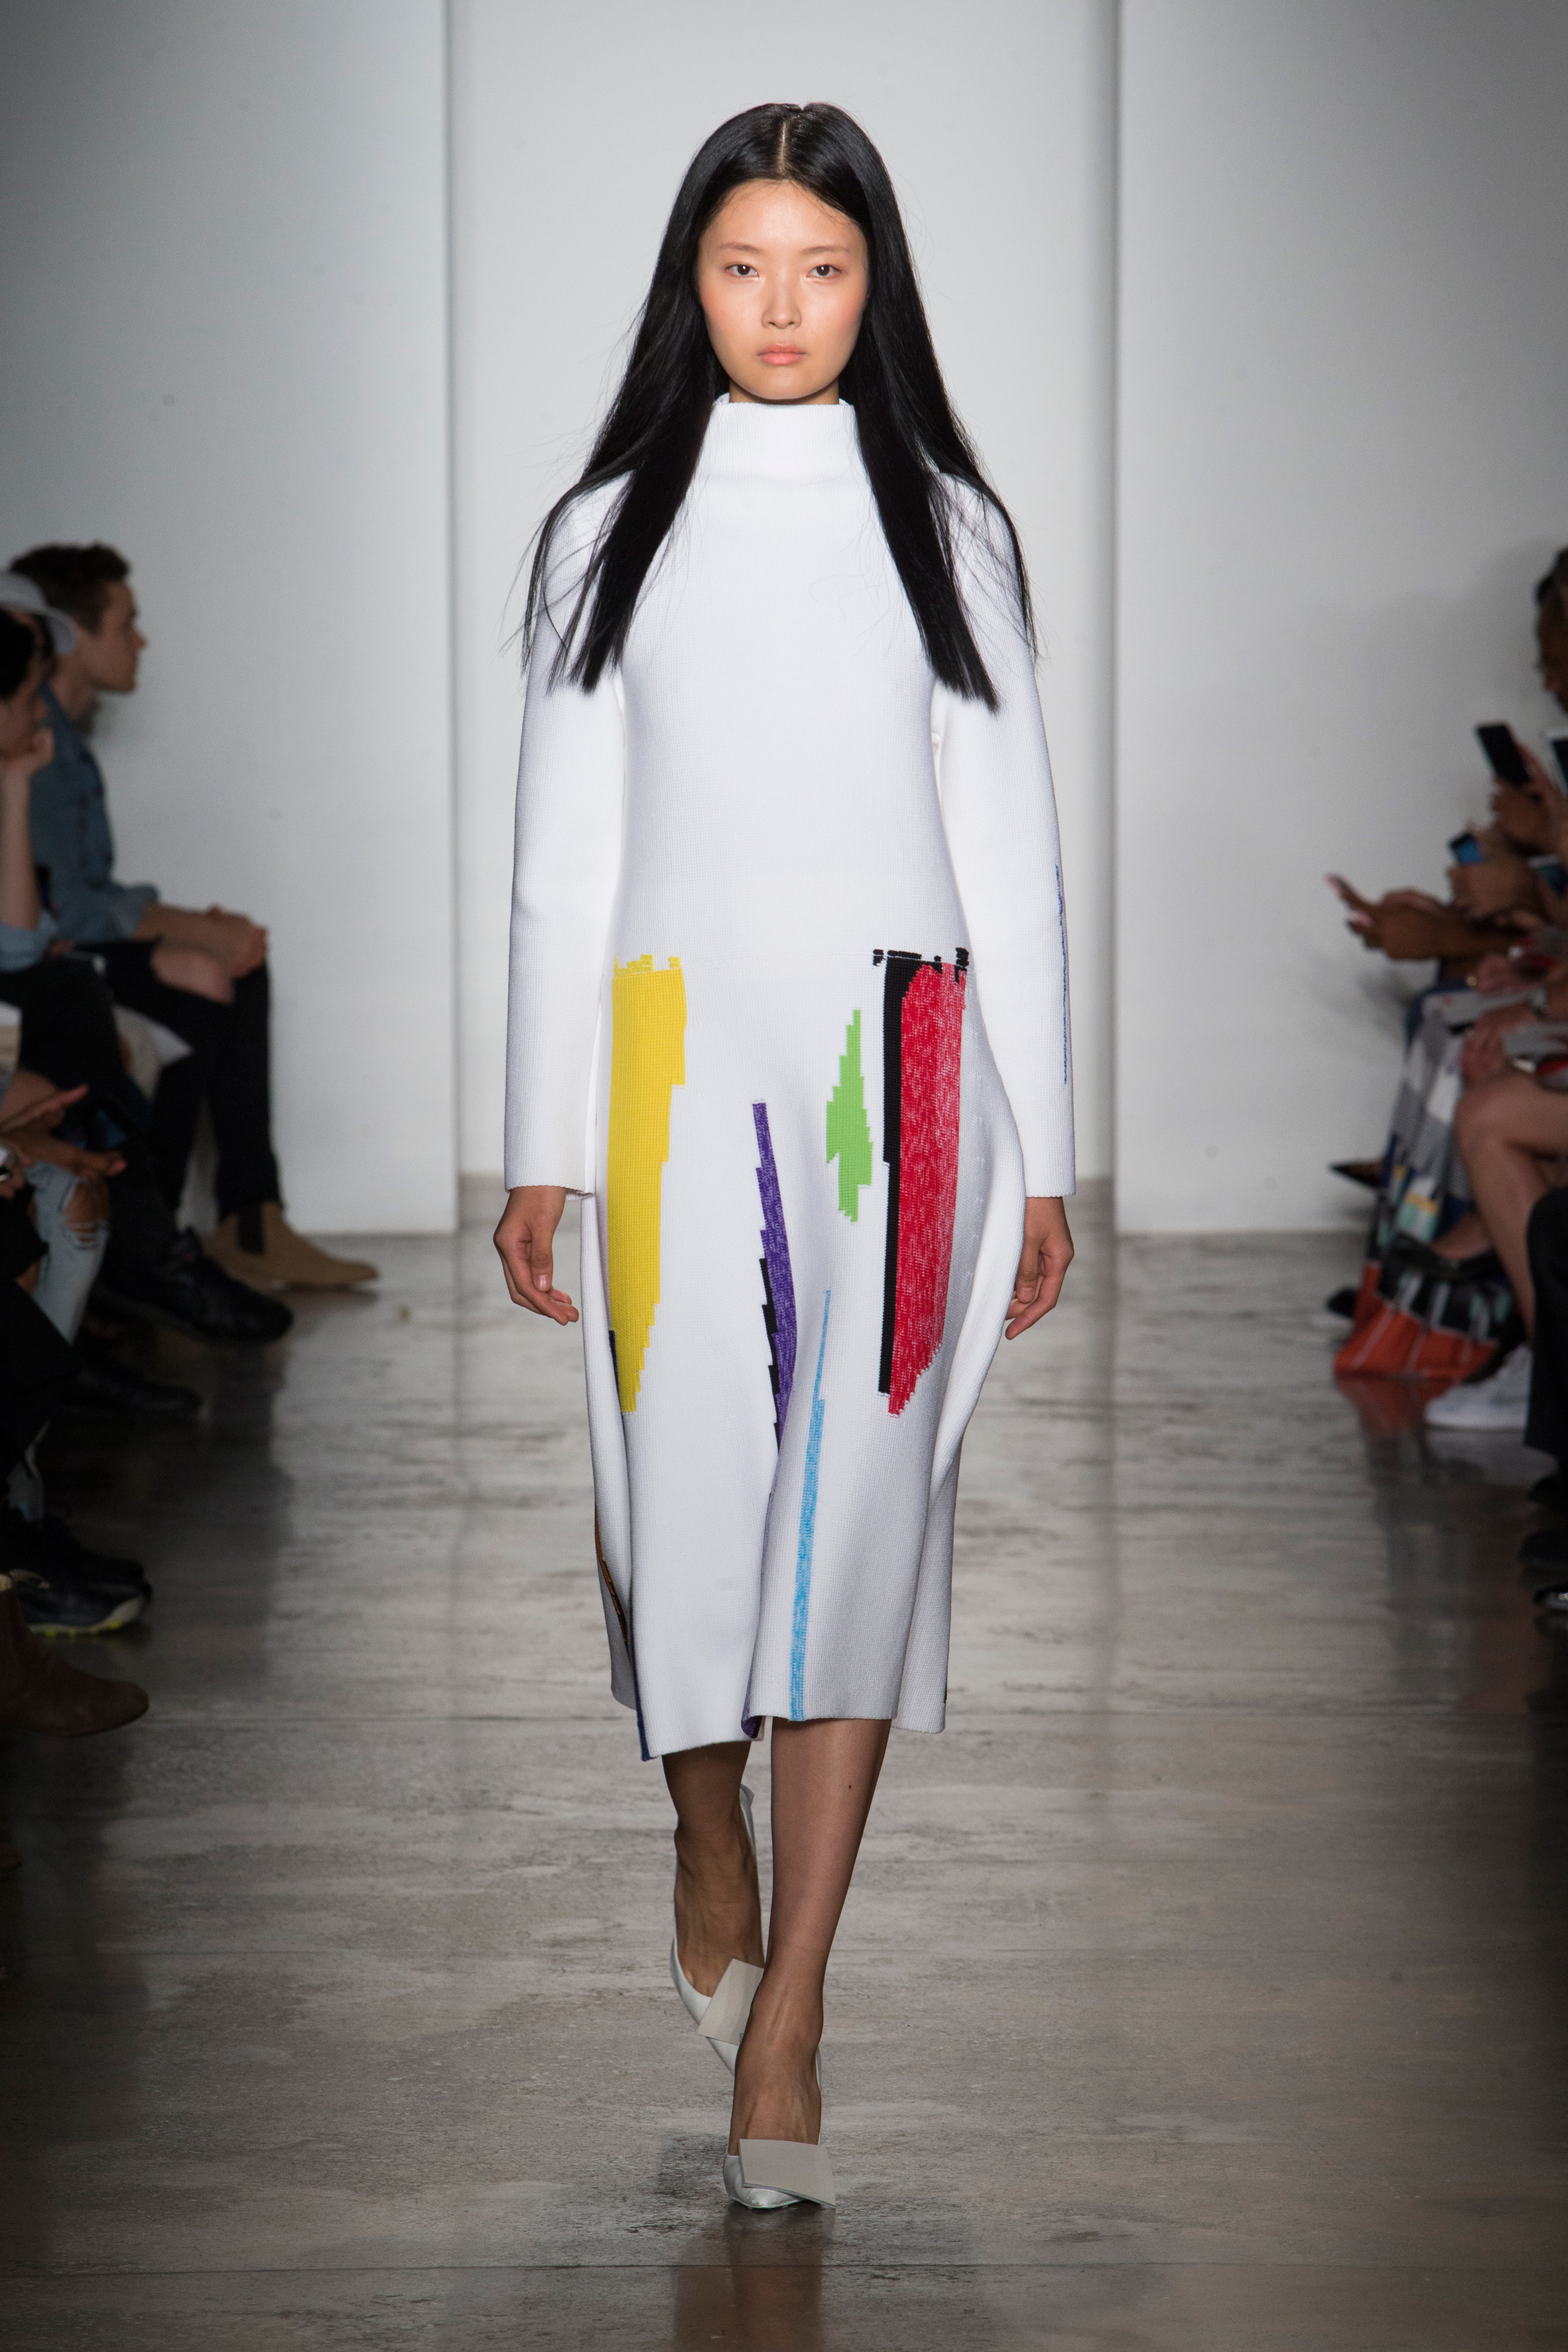 Xiang Gao's graduate fashion collection from Parsons School of Design